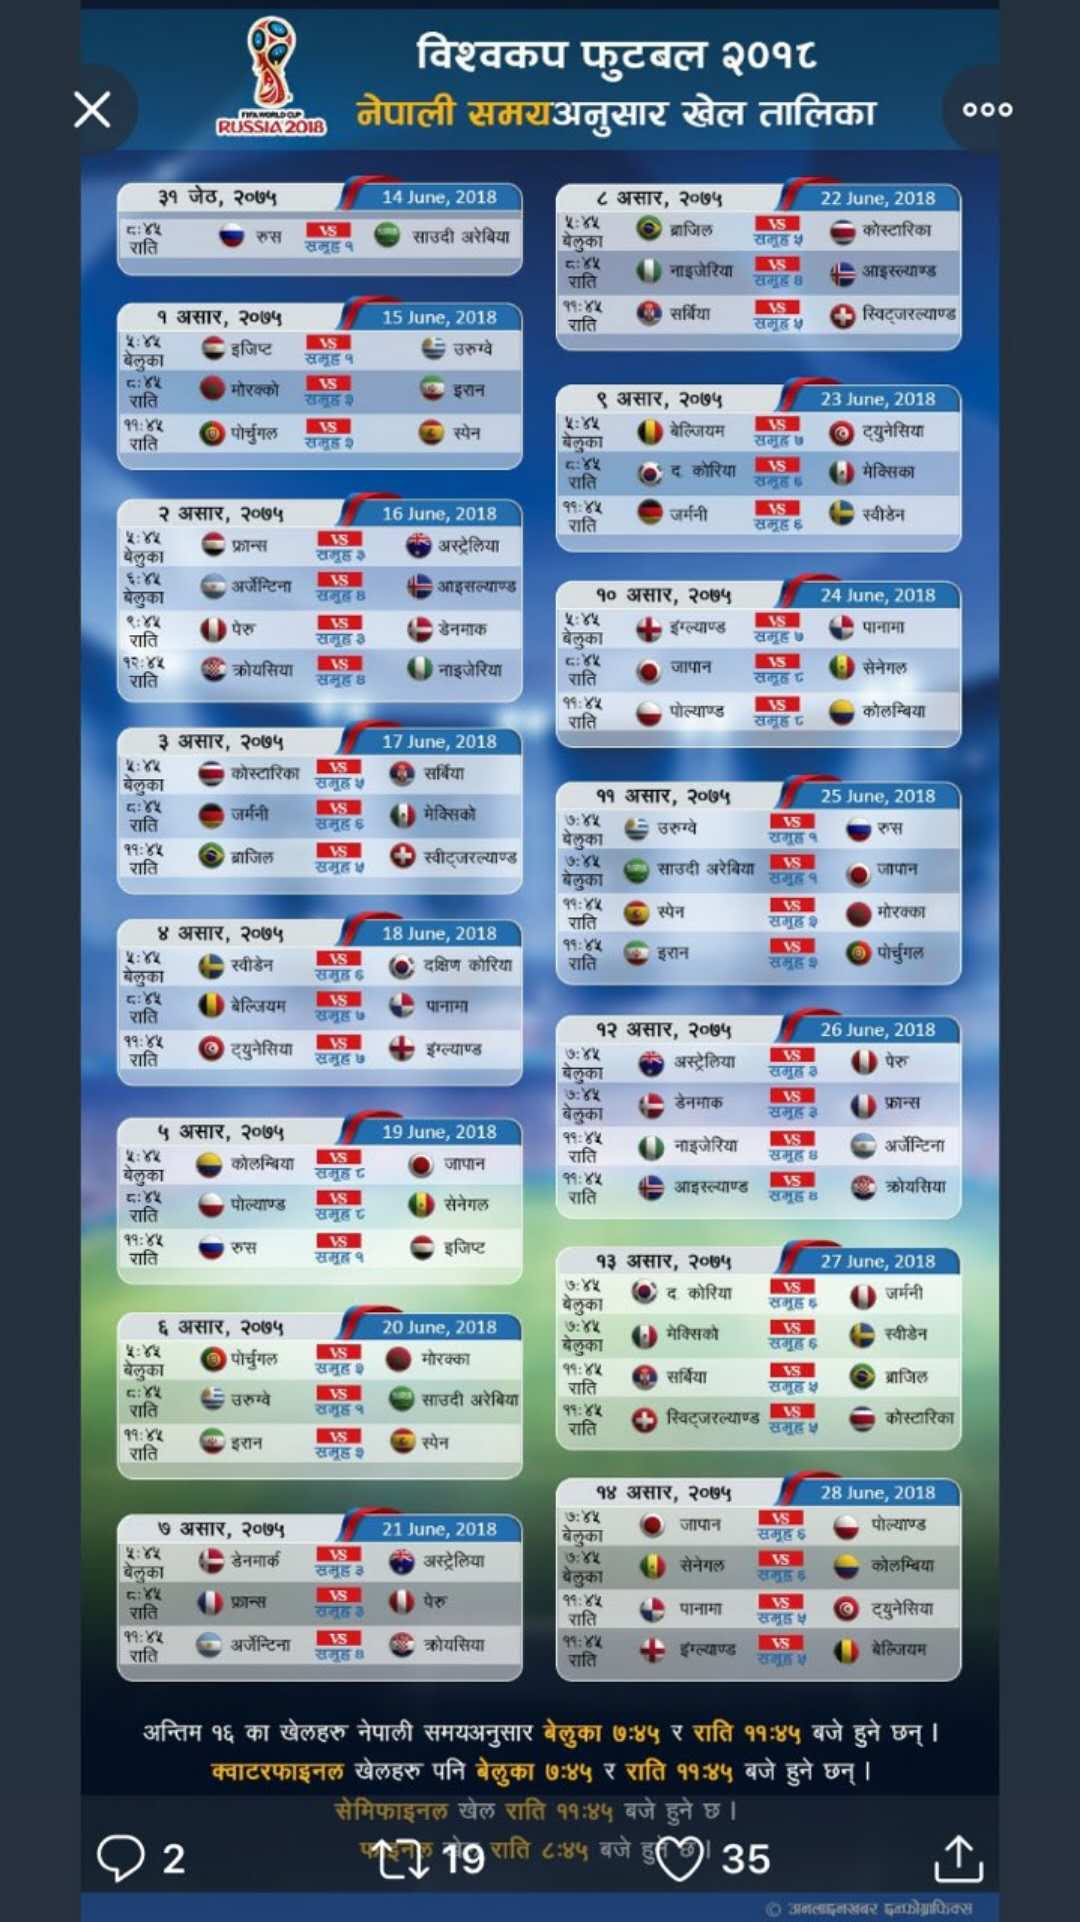 Fifa World cup Football 2018 match schedule in Nepali time and date